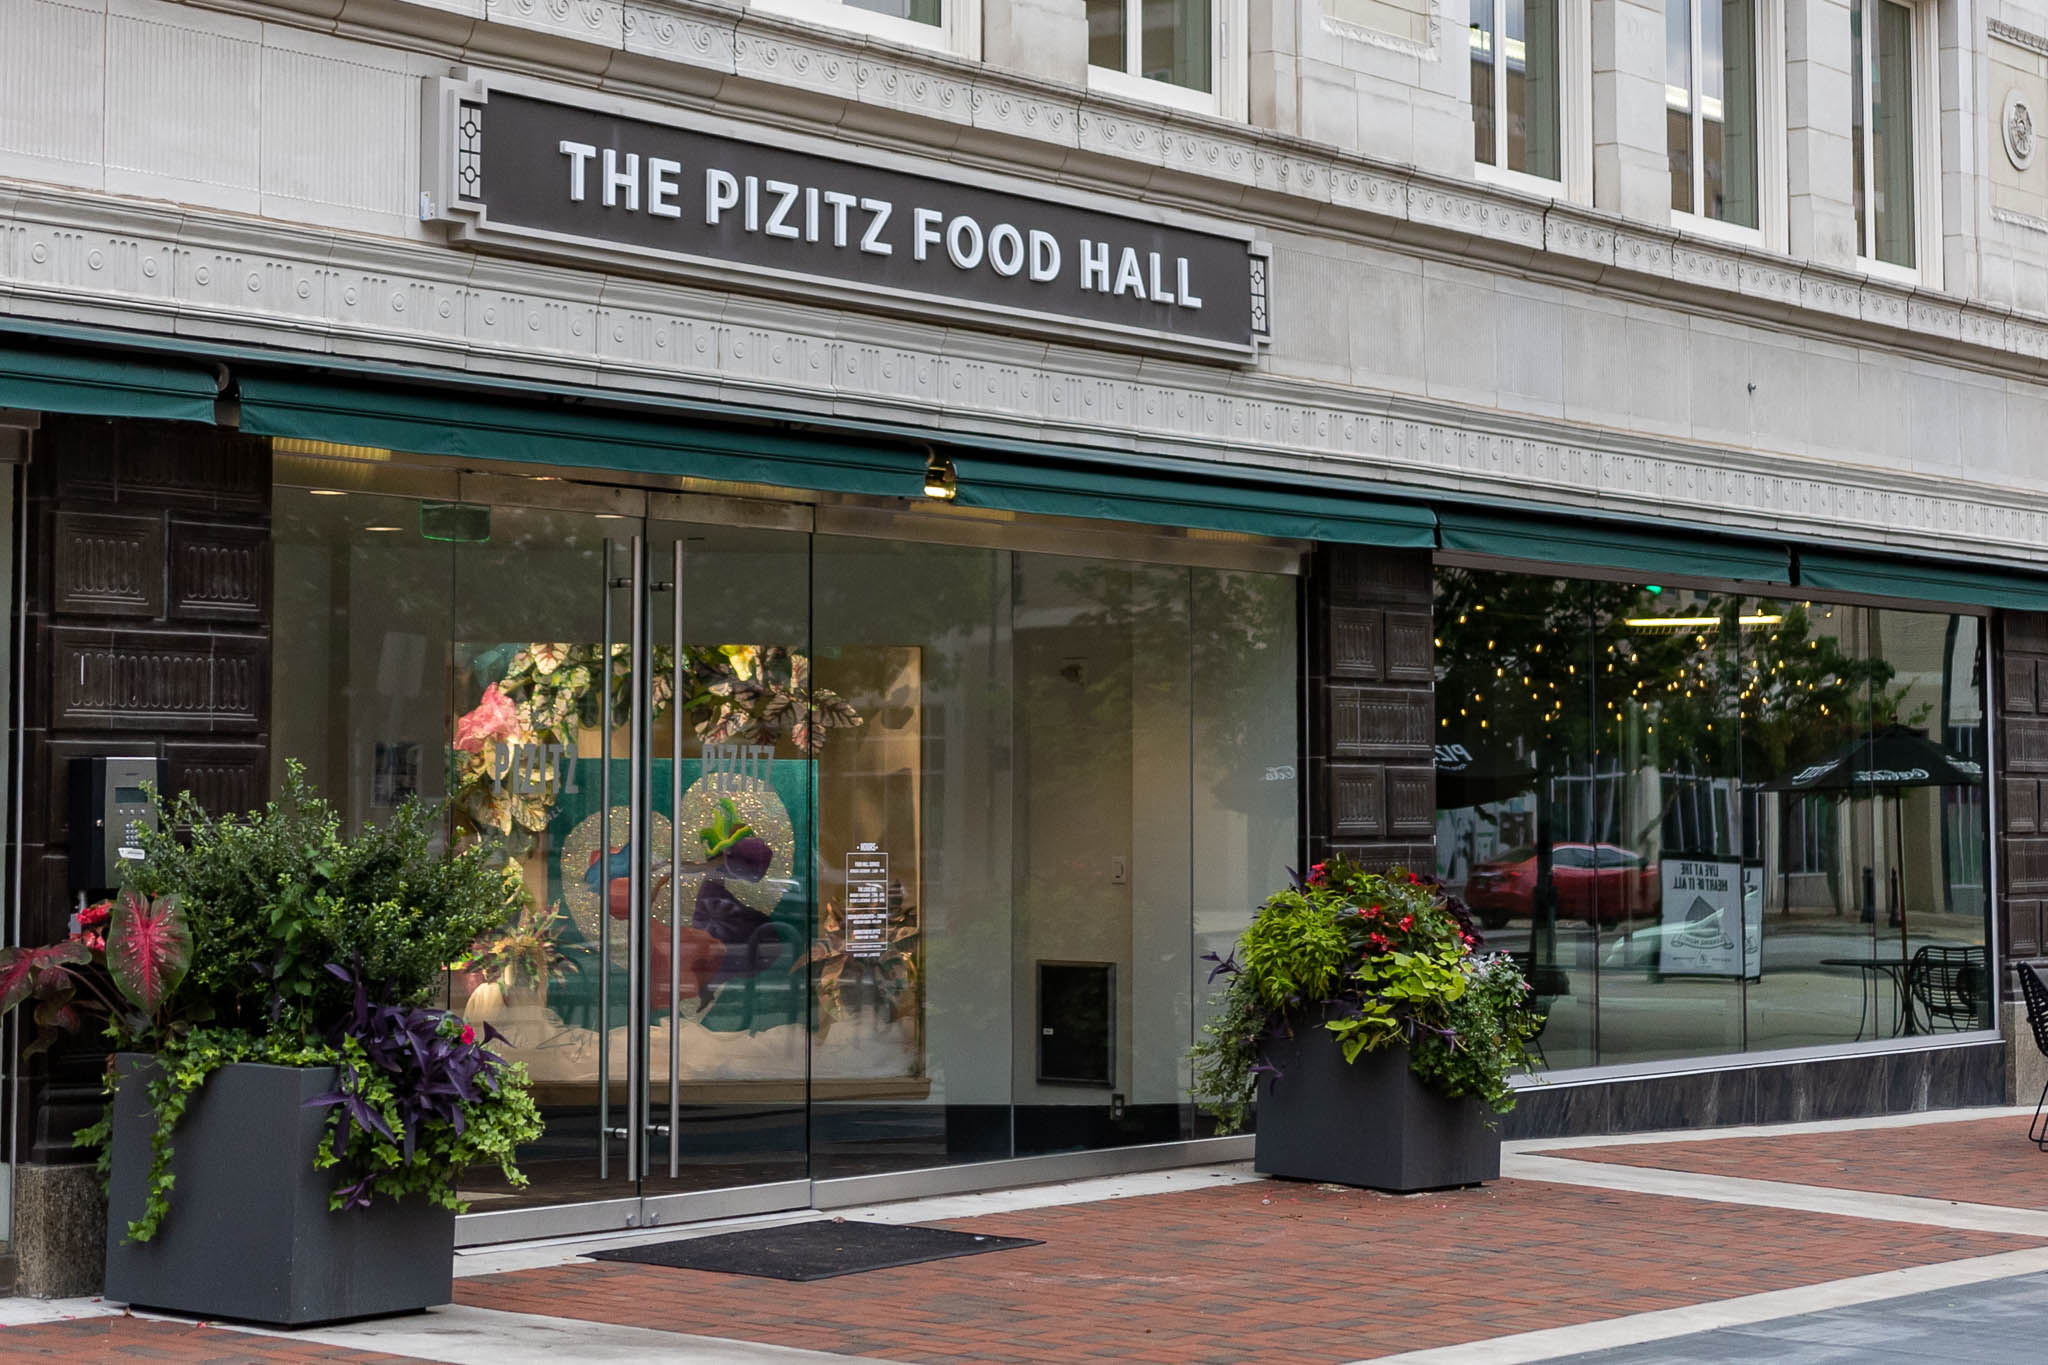 The Pizitz 27 22 Birmingham area festivals and events to look forward to this spring